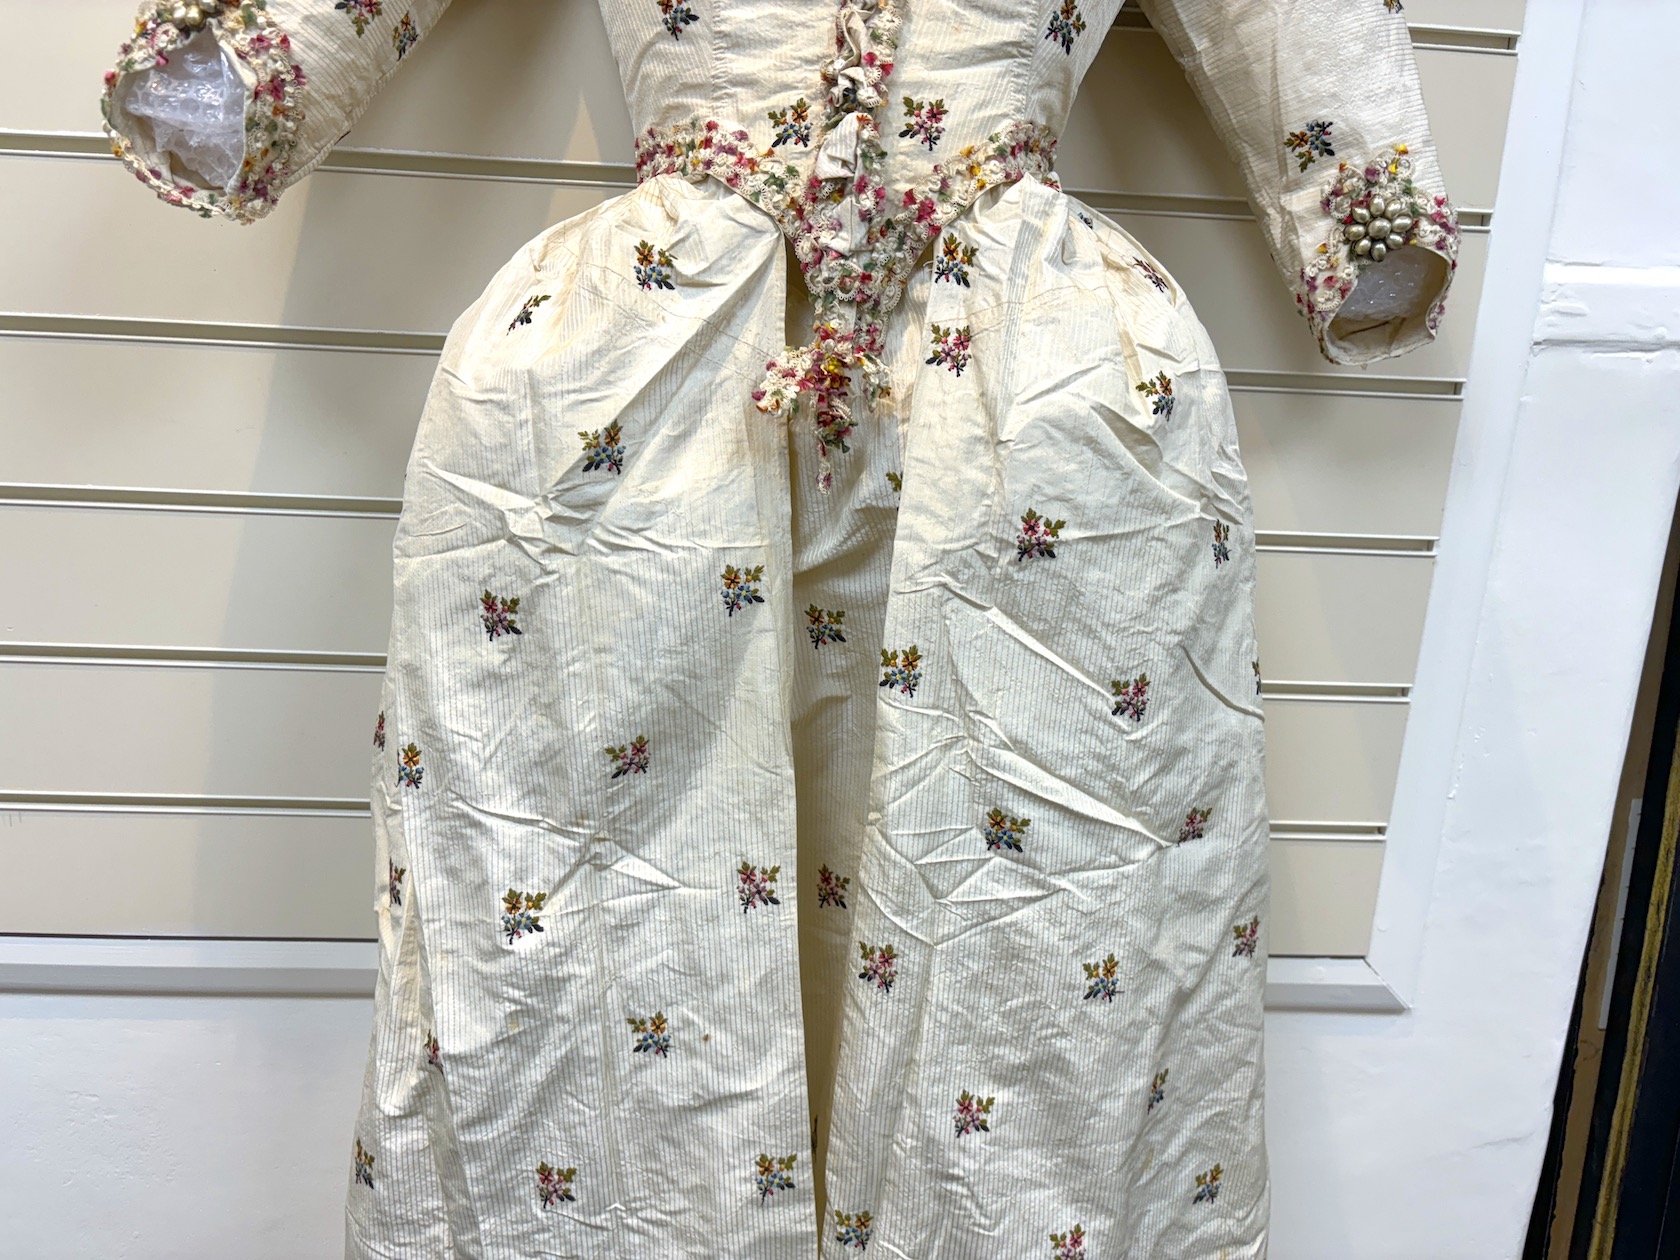 A rare 18th century, possibly Spitalfields, cream silk ladies dress, circa 1770-1780, made in the English style